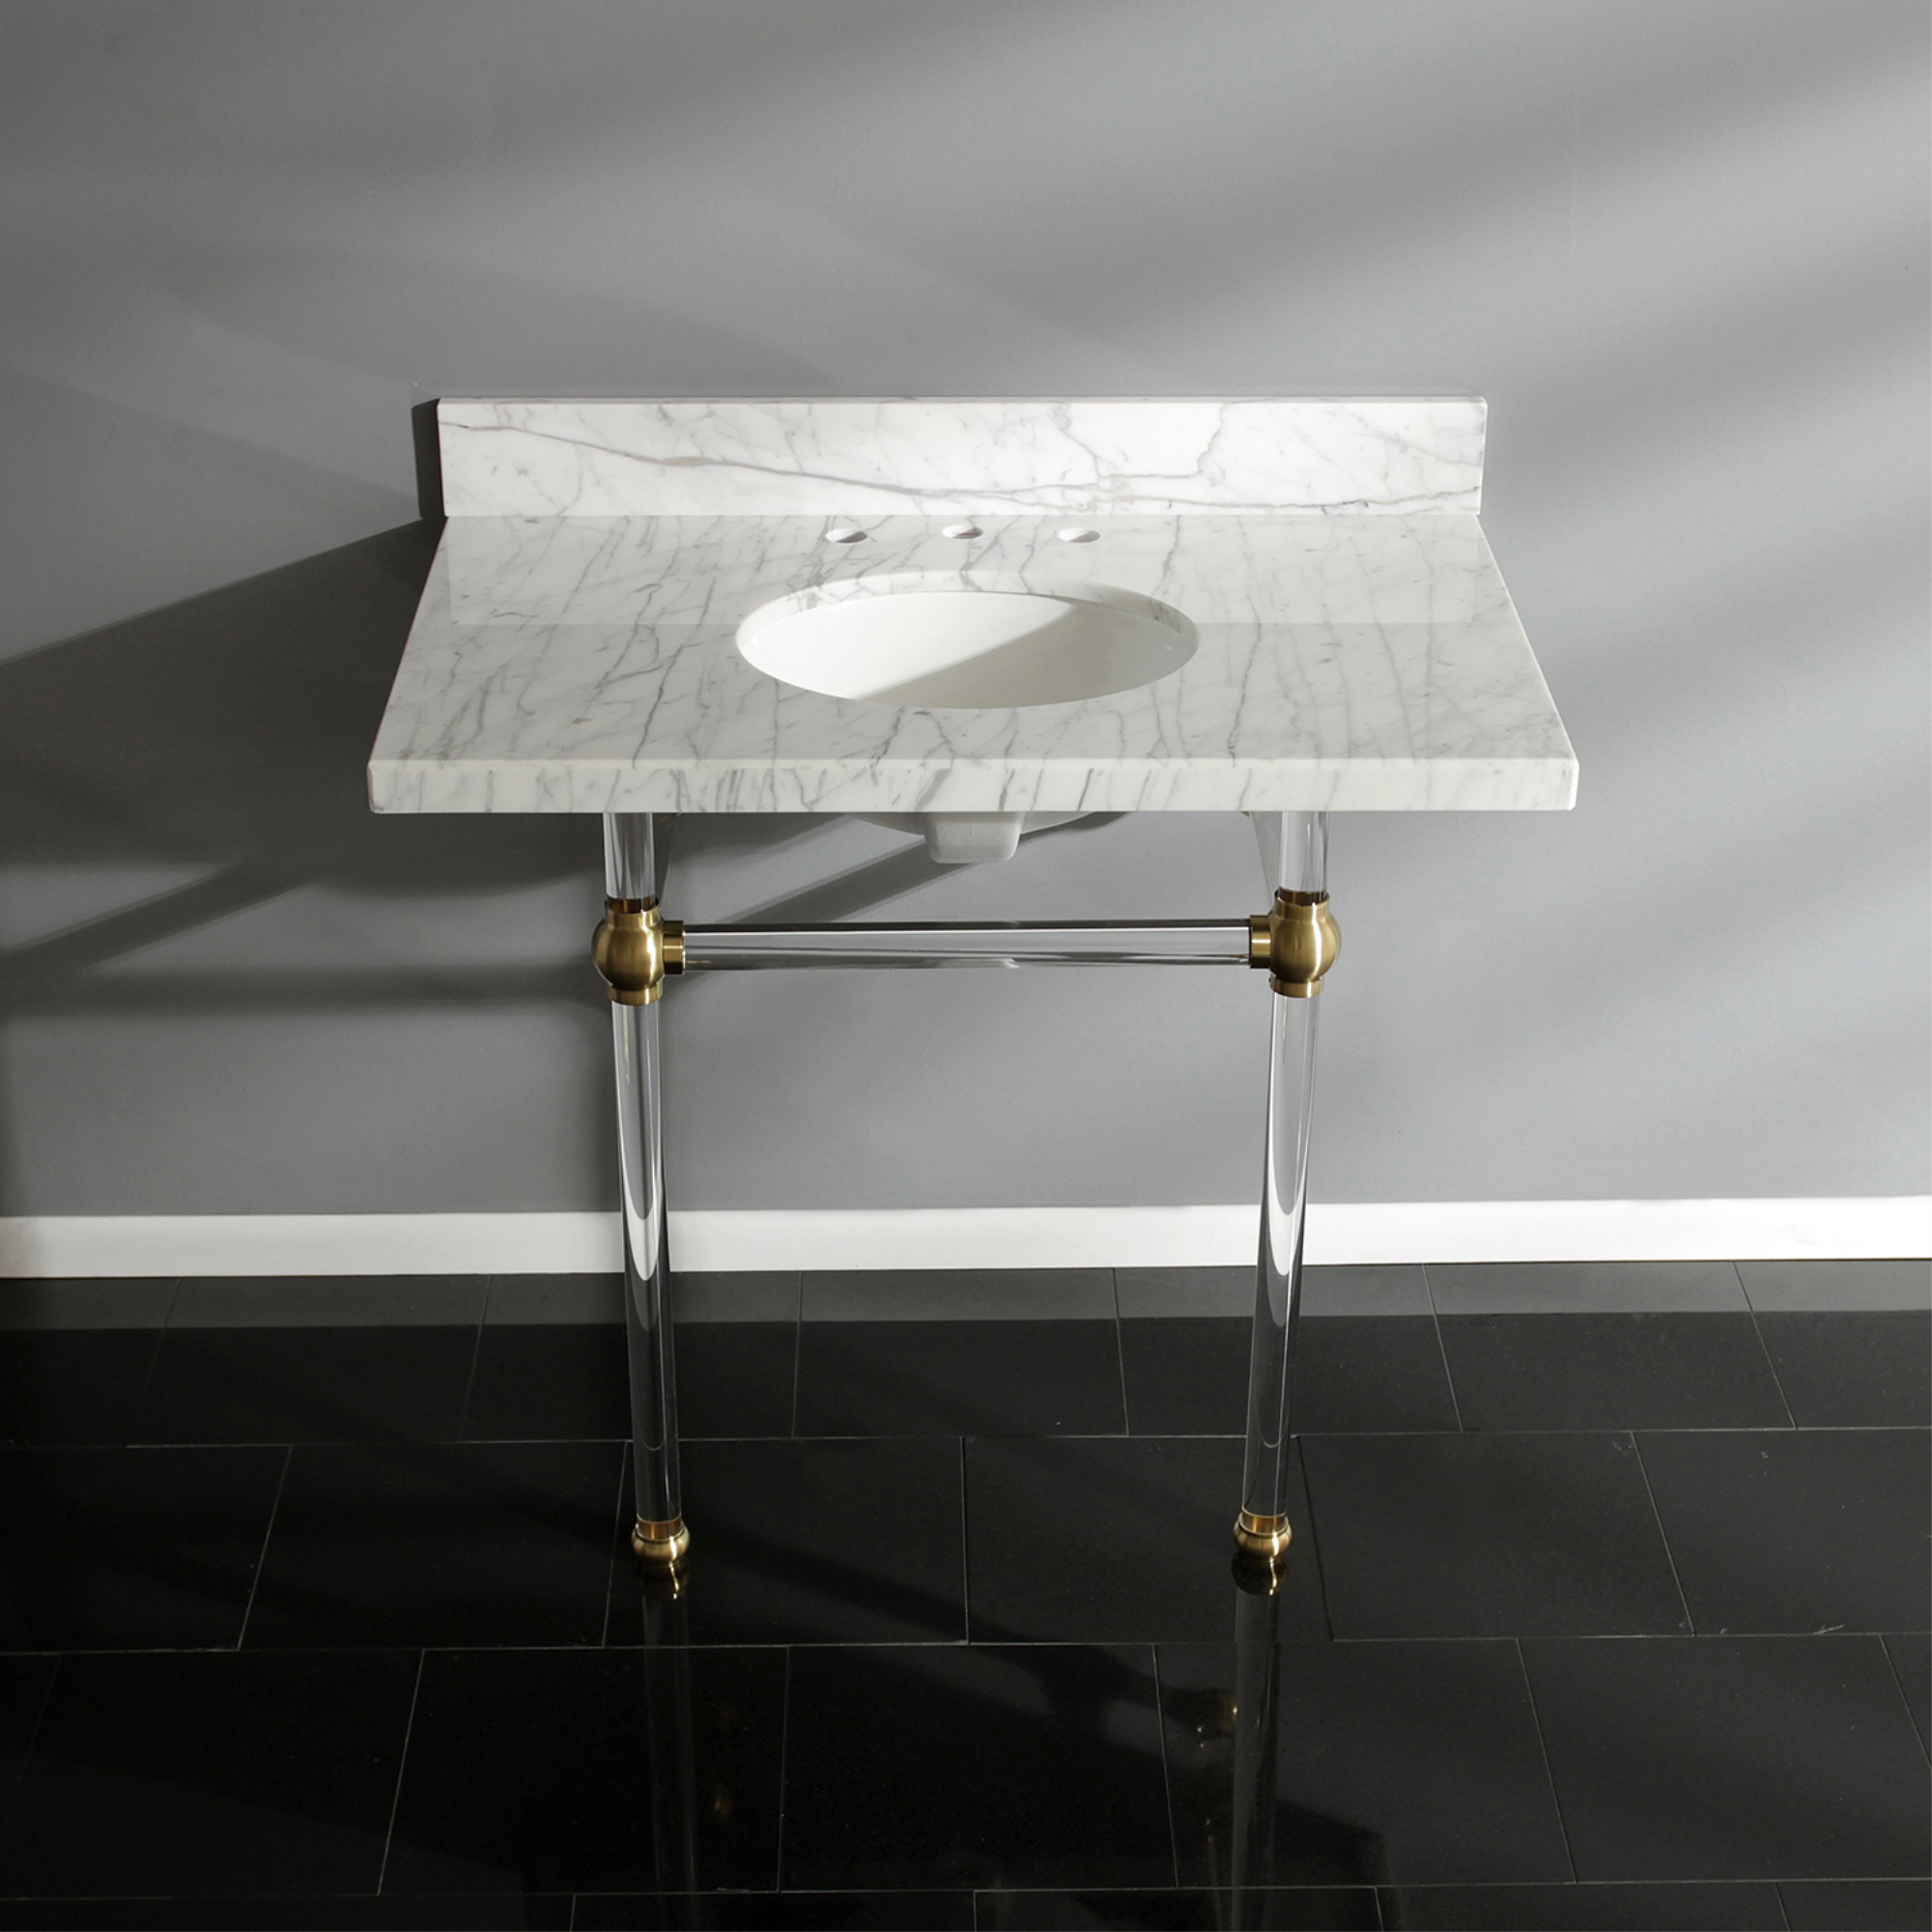 Fauceture KVPB3630MA7 Templeton 36X22 Carrara Marble Vanity Top with Clear Acrylic Feet Combo, Carrara Marble/Brushed Brass